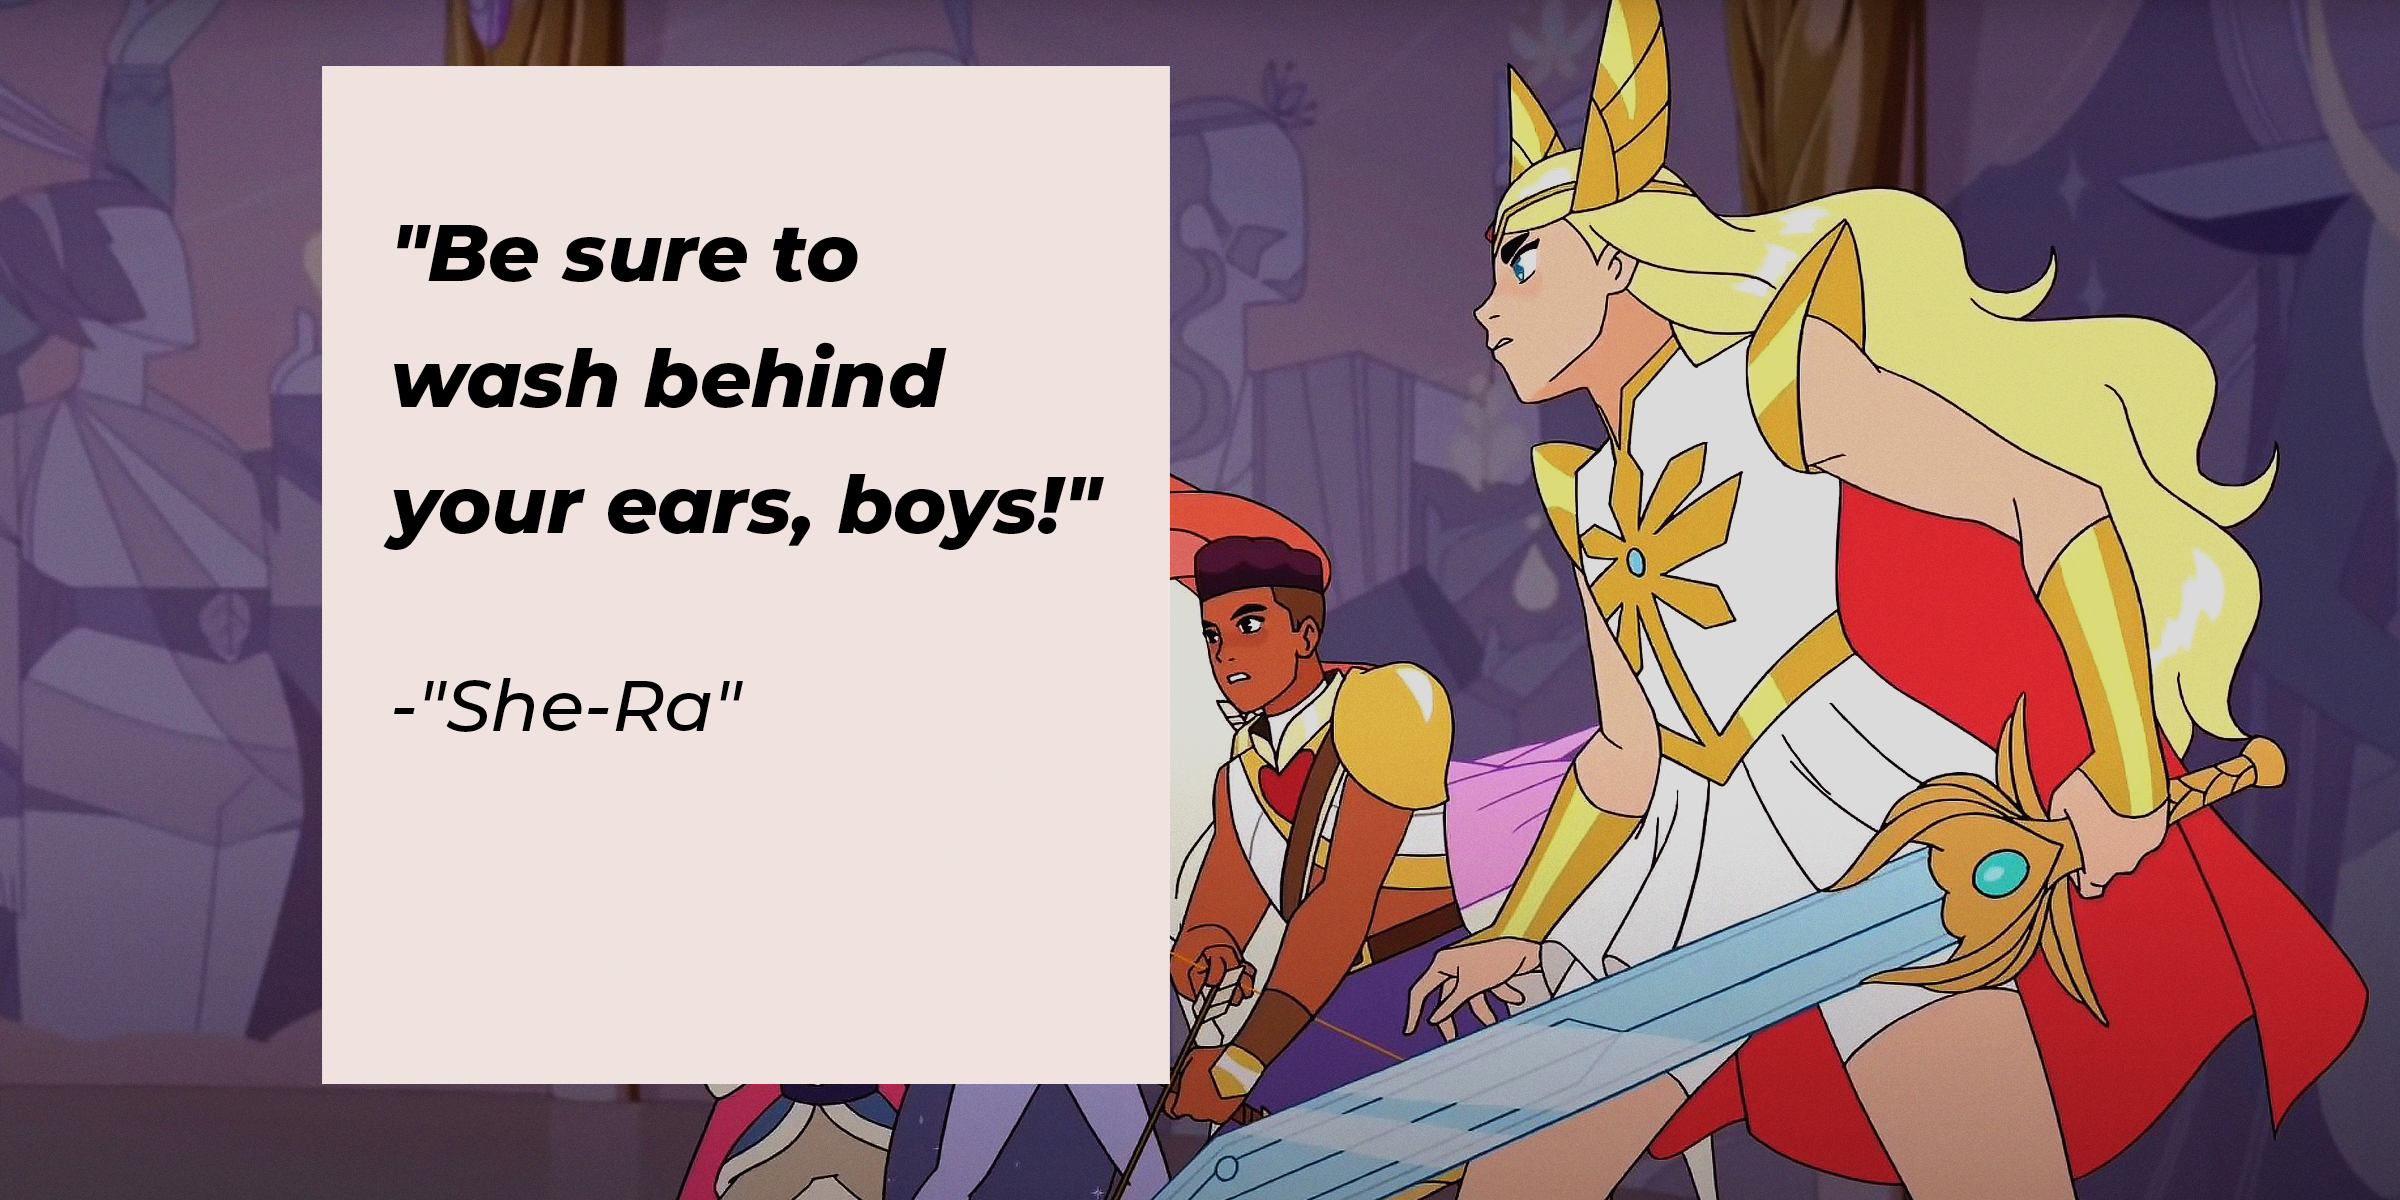 Photo of She-Ra with the quote: "Be sure to wash behind your ears, boys!" | Source: Facebook.com/DreamWorksSheRa